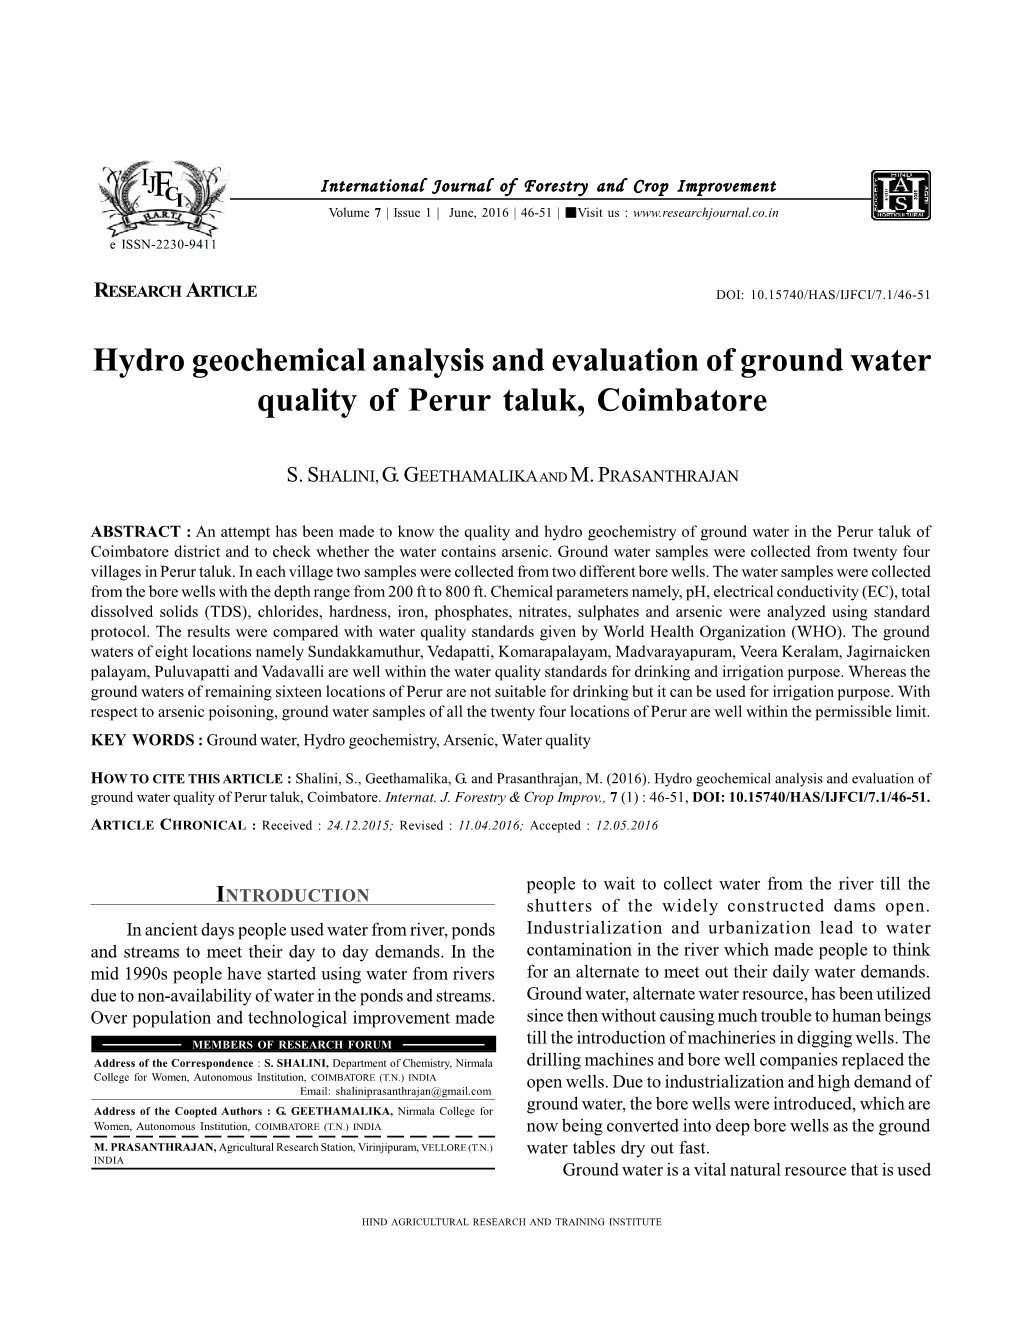 Hydro Geochemical Analysis and Evaluation of Ground Water Quality of Perur Taluk, Coimbatore